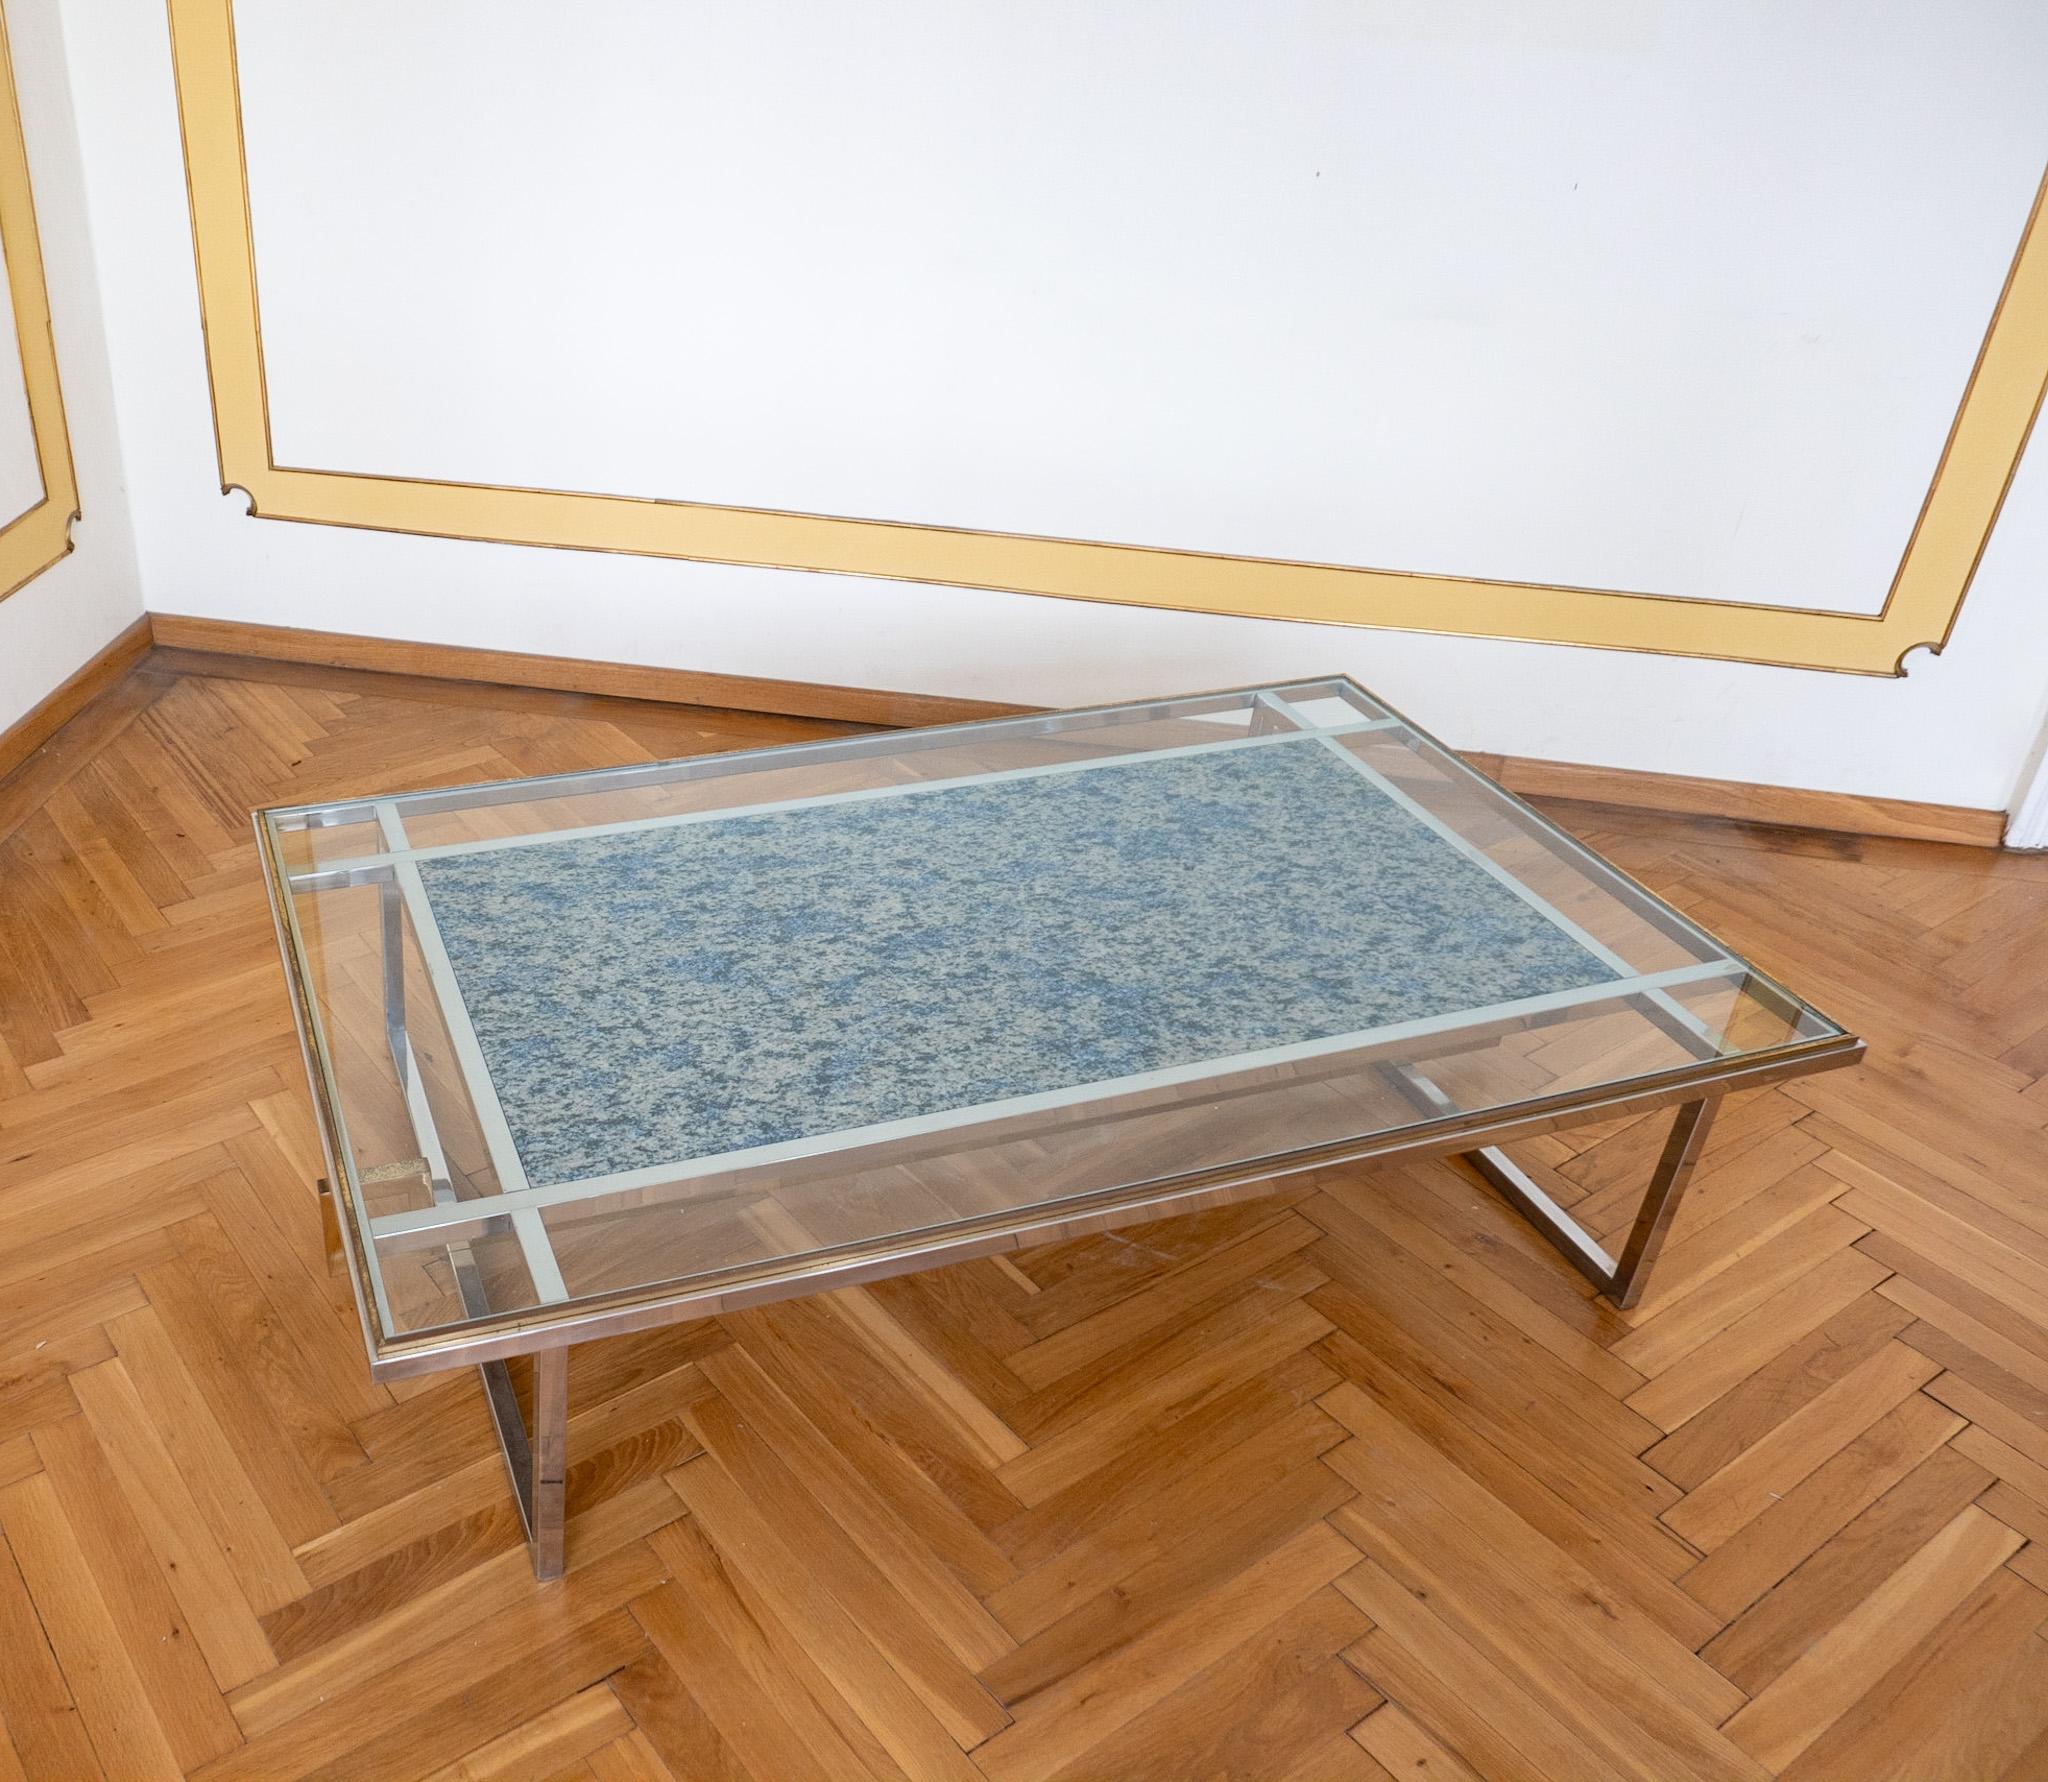 Mid-Century Modern Brass Chrome Glass Marble Coffee Table in the Style of Romeo Rega, Italy 1970s.

Introducing a masterpiece of mid-century modern design, the large brass chrome glass coffee table in the style of the Italian designer Romeo Rega